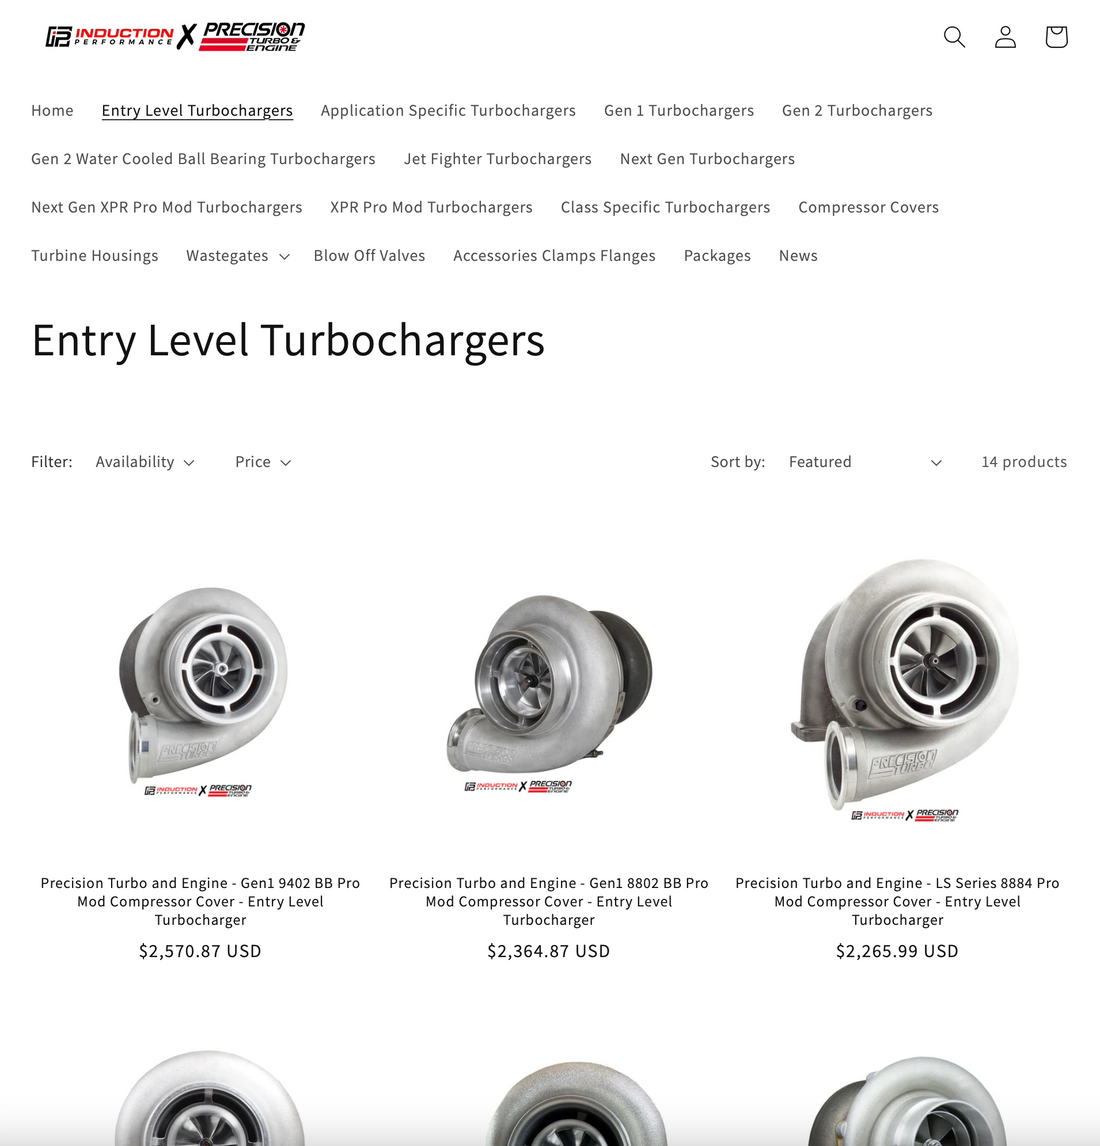 Do you need high quality and high performance on a budget? Our Entry Level Turbo line up has you covered!